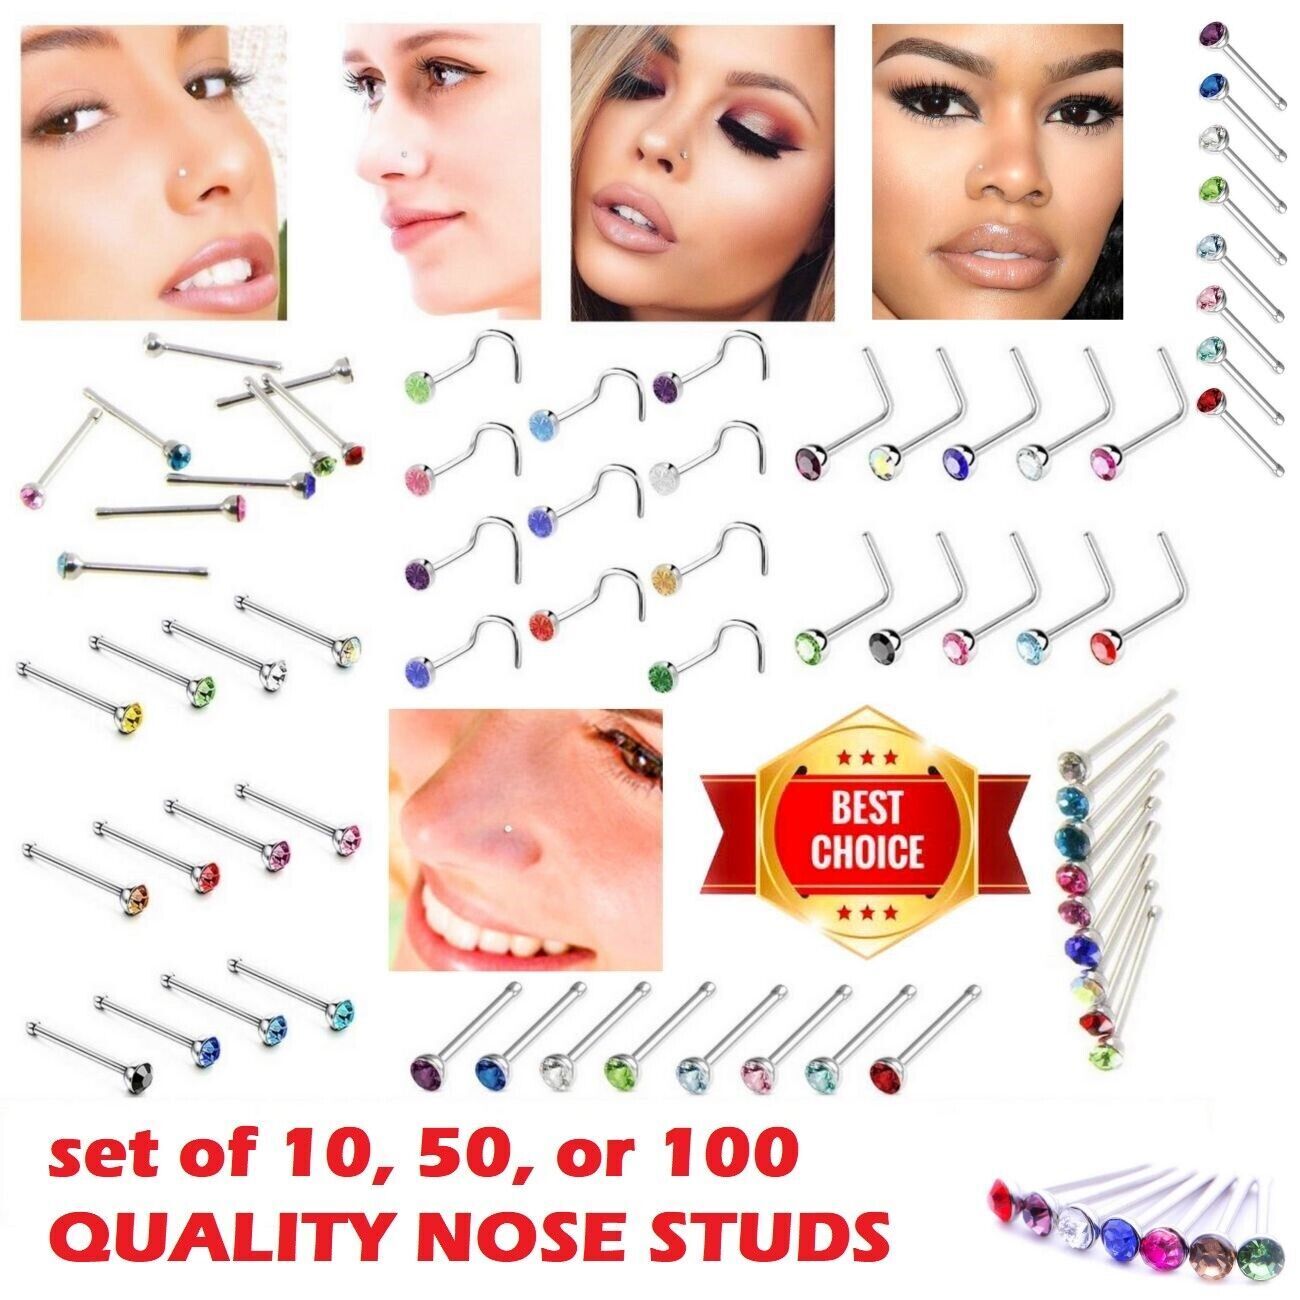 Nose Stud Sets Surgical Steel L Screw Straight Silver Ball End Nose Pin Piercing